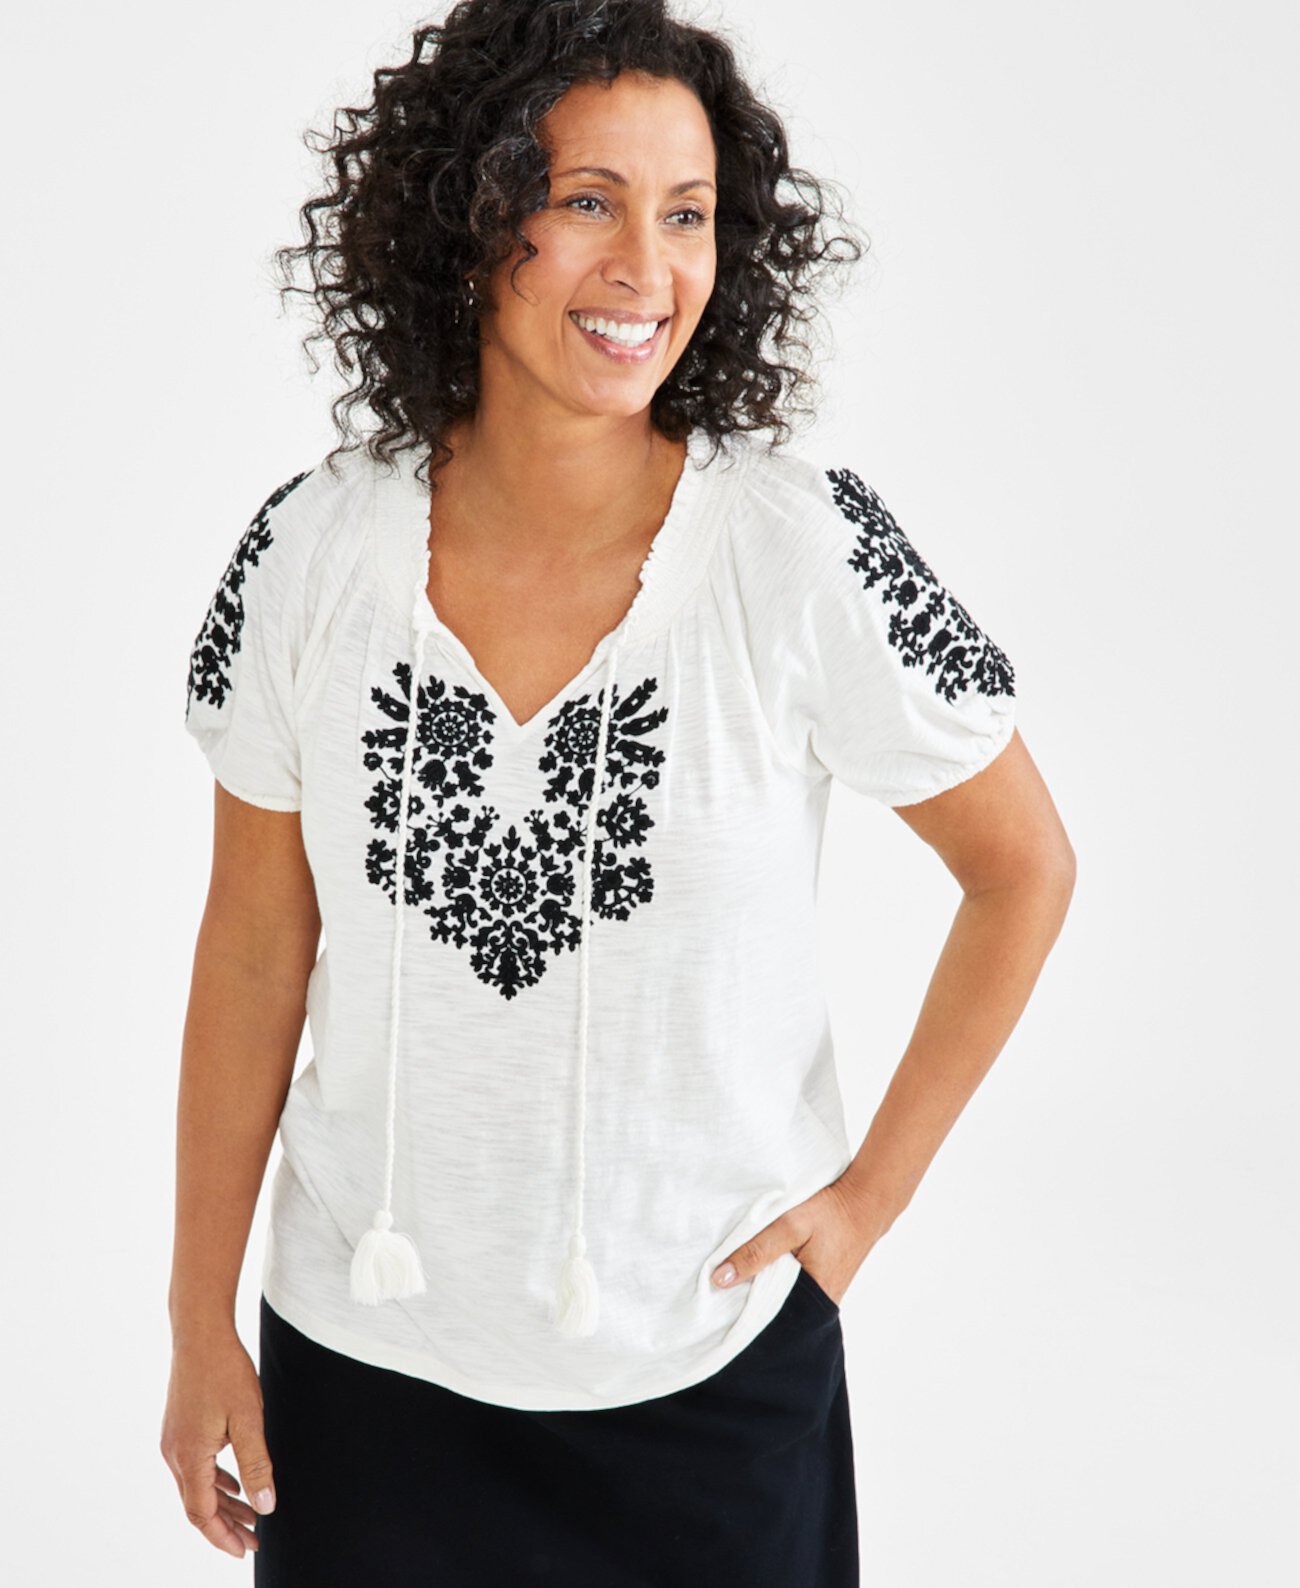 Petite Vacay Embroidered Tassel-Tie Top, Created for Macy's Style & Co